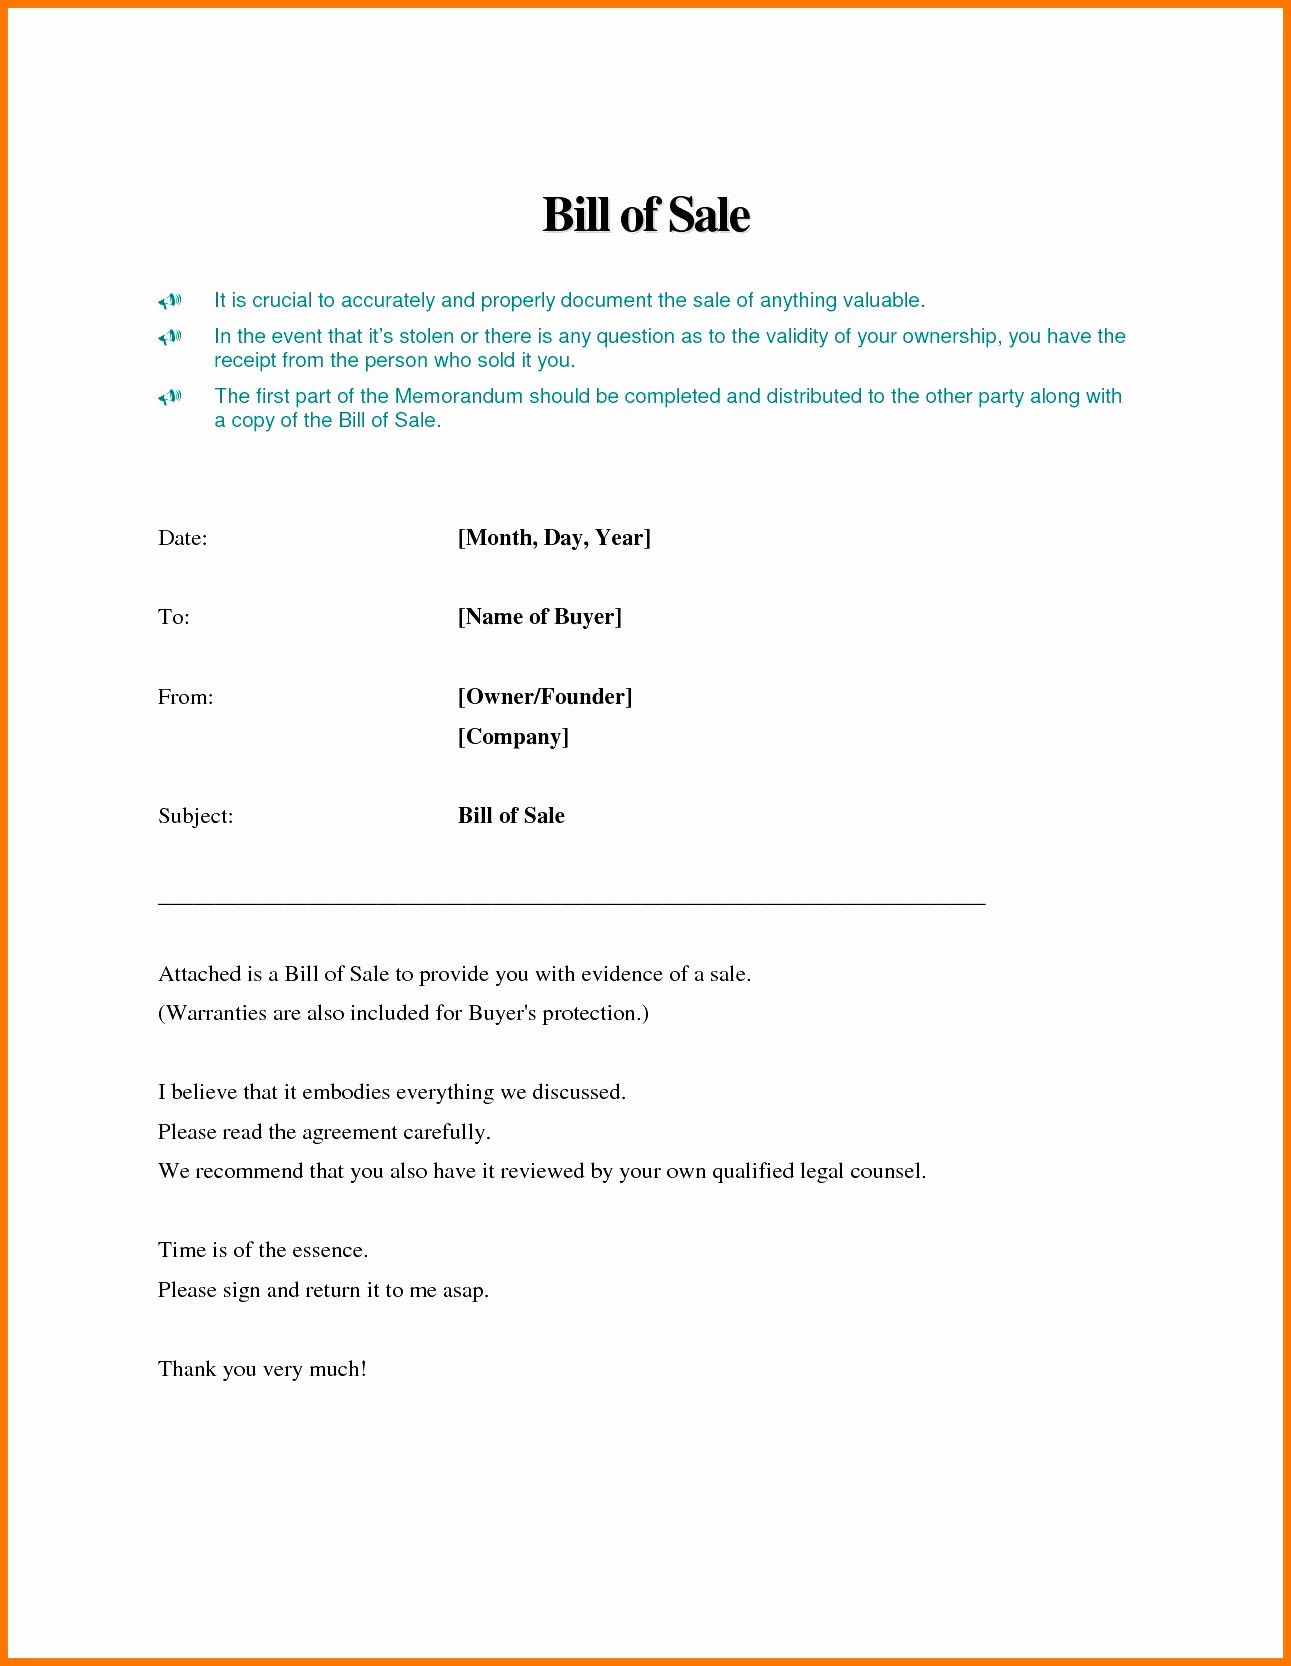 50 New Fake Bill Of Sale DOCUMENT IDEAS Document